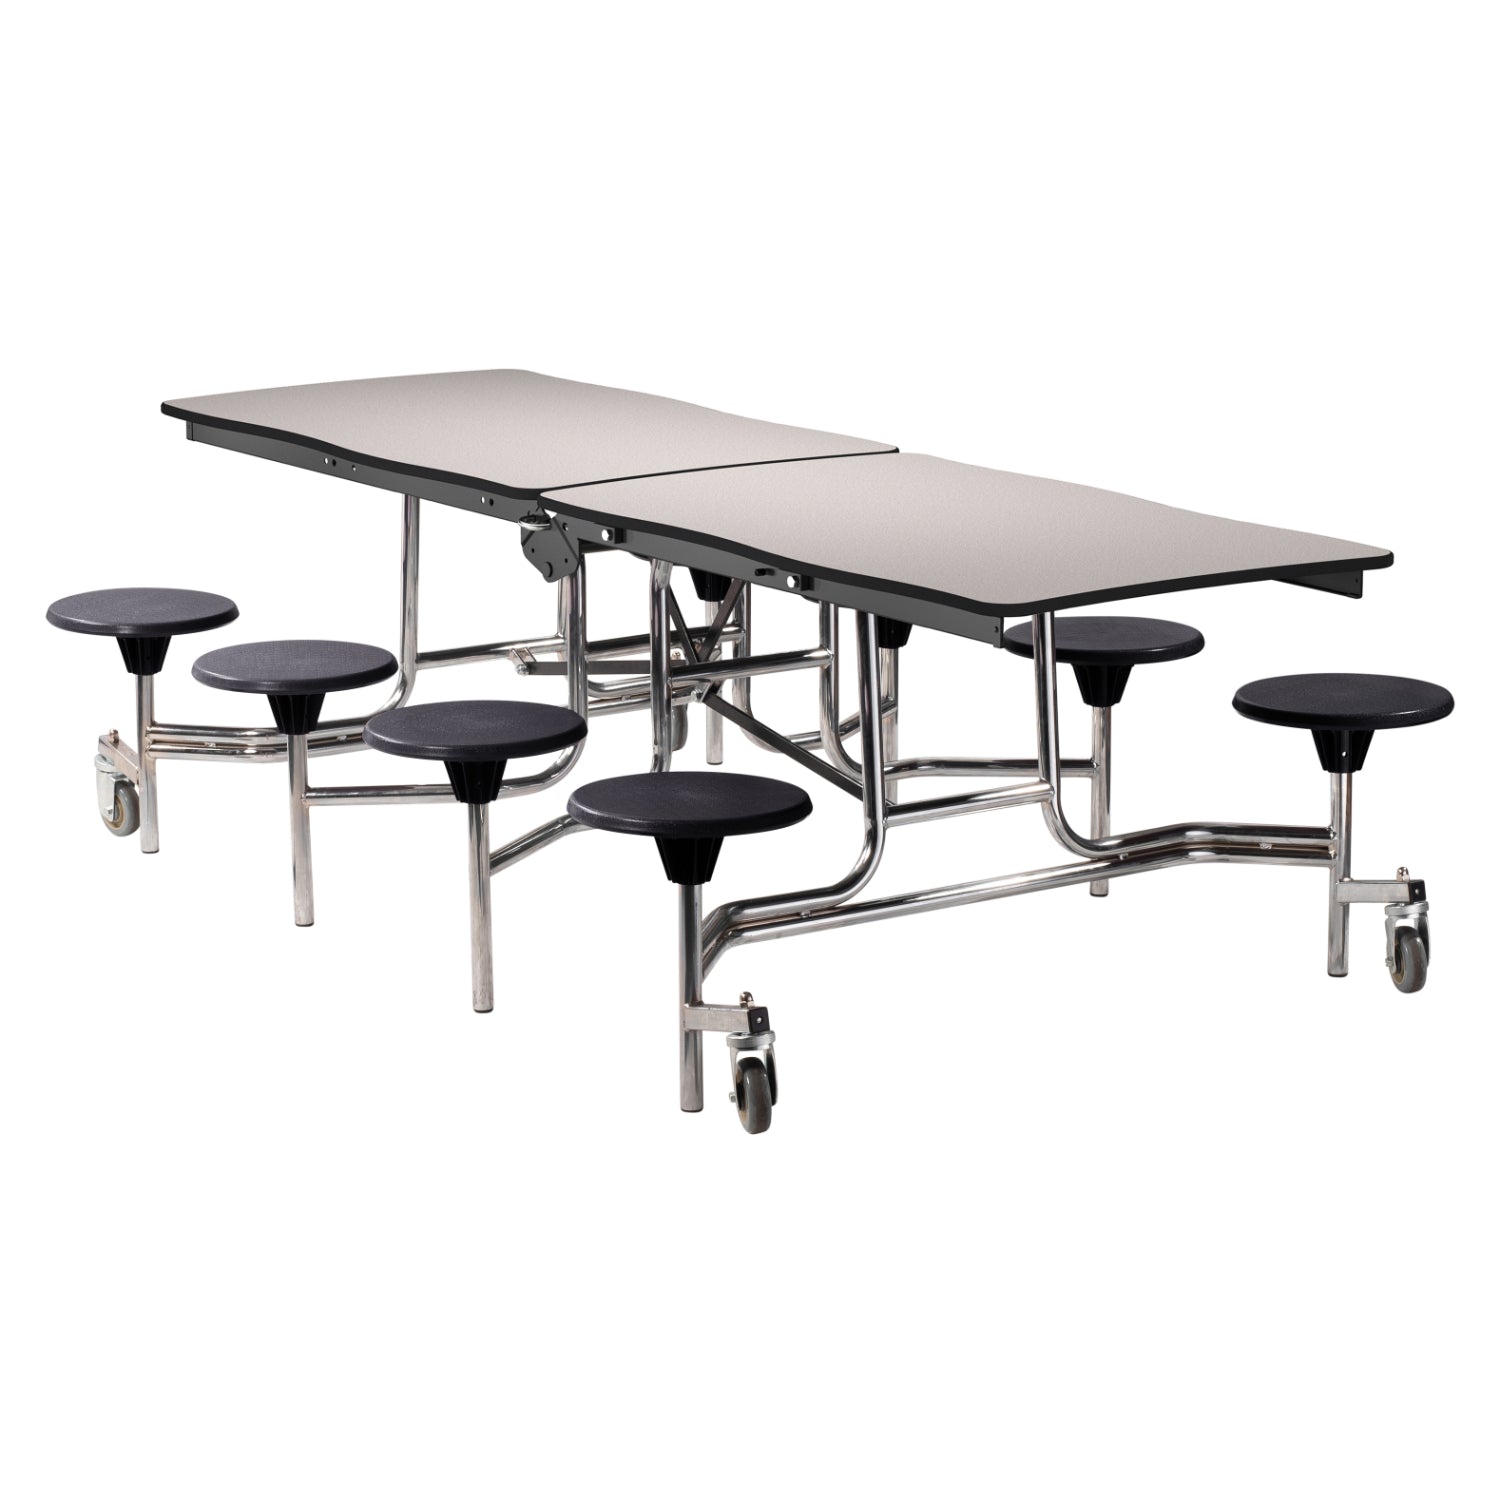 Mobile Cafeteria Table with 8 Stools, 8' Swerve, Particleboard Core, Vinyl T-Mold Edge, Chrome Frame